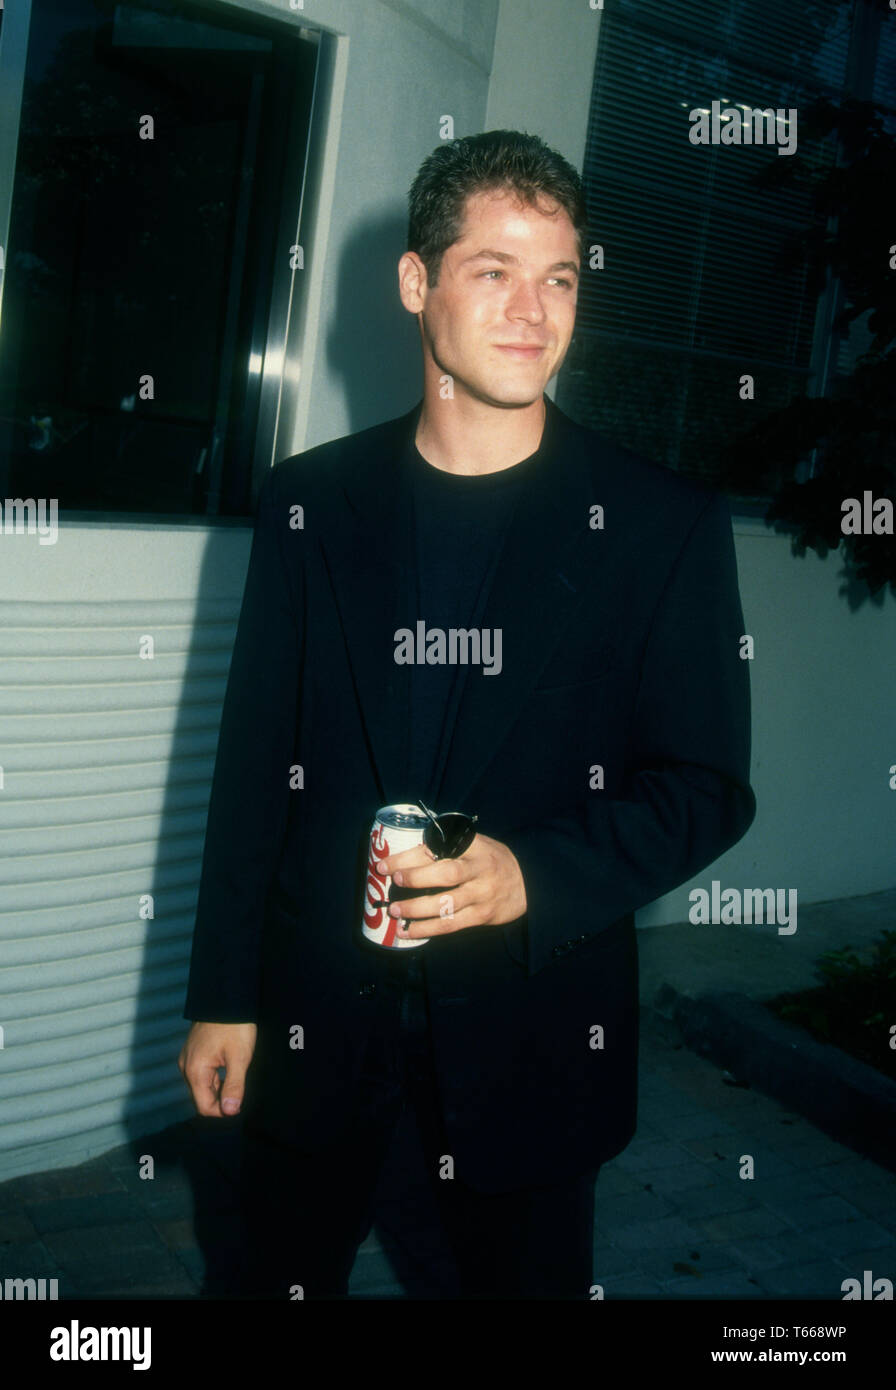 Culver City, California, USA 10th April, 1994  Actor David Barry Gray attends TriStar Pictures 'Cops and Robbersons' Premiere on April 10, 1994 at Sony Studios in Culver City, California, USA. Photo by Barry King/Alamy Stock Photo Stock Photo